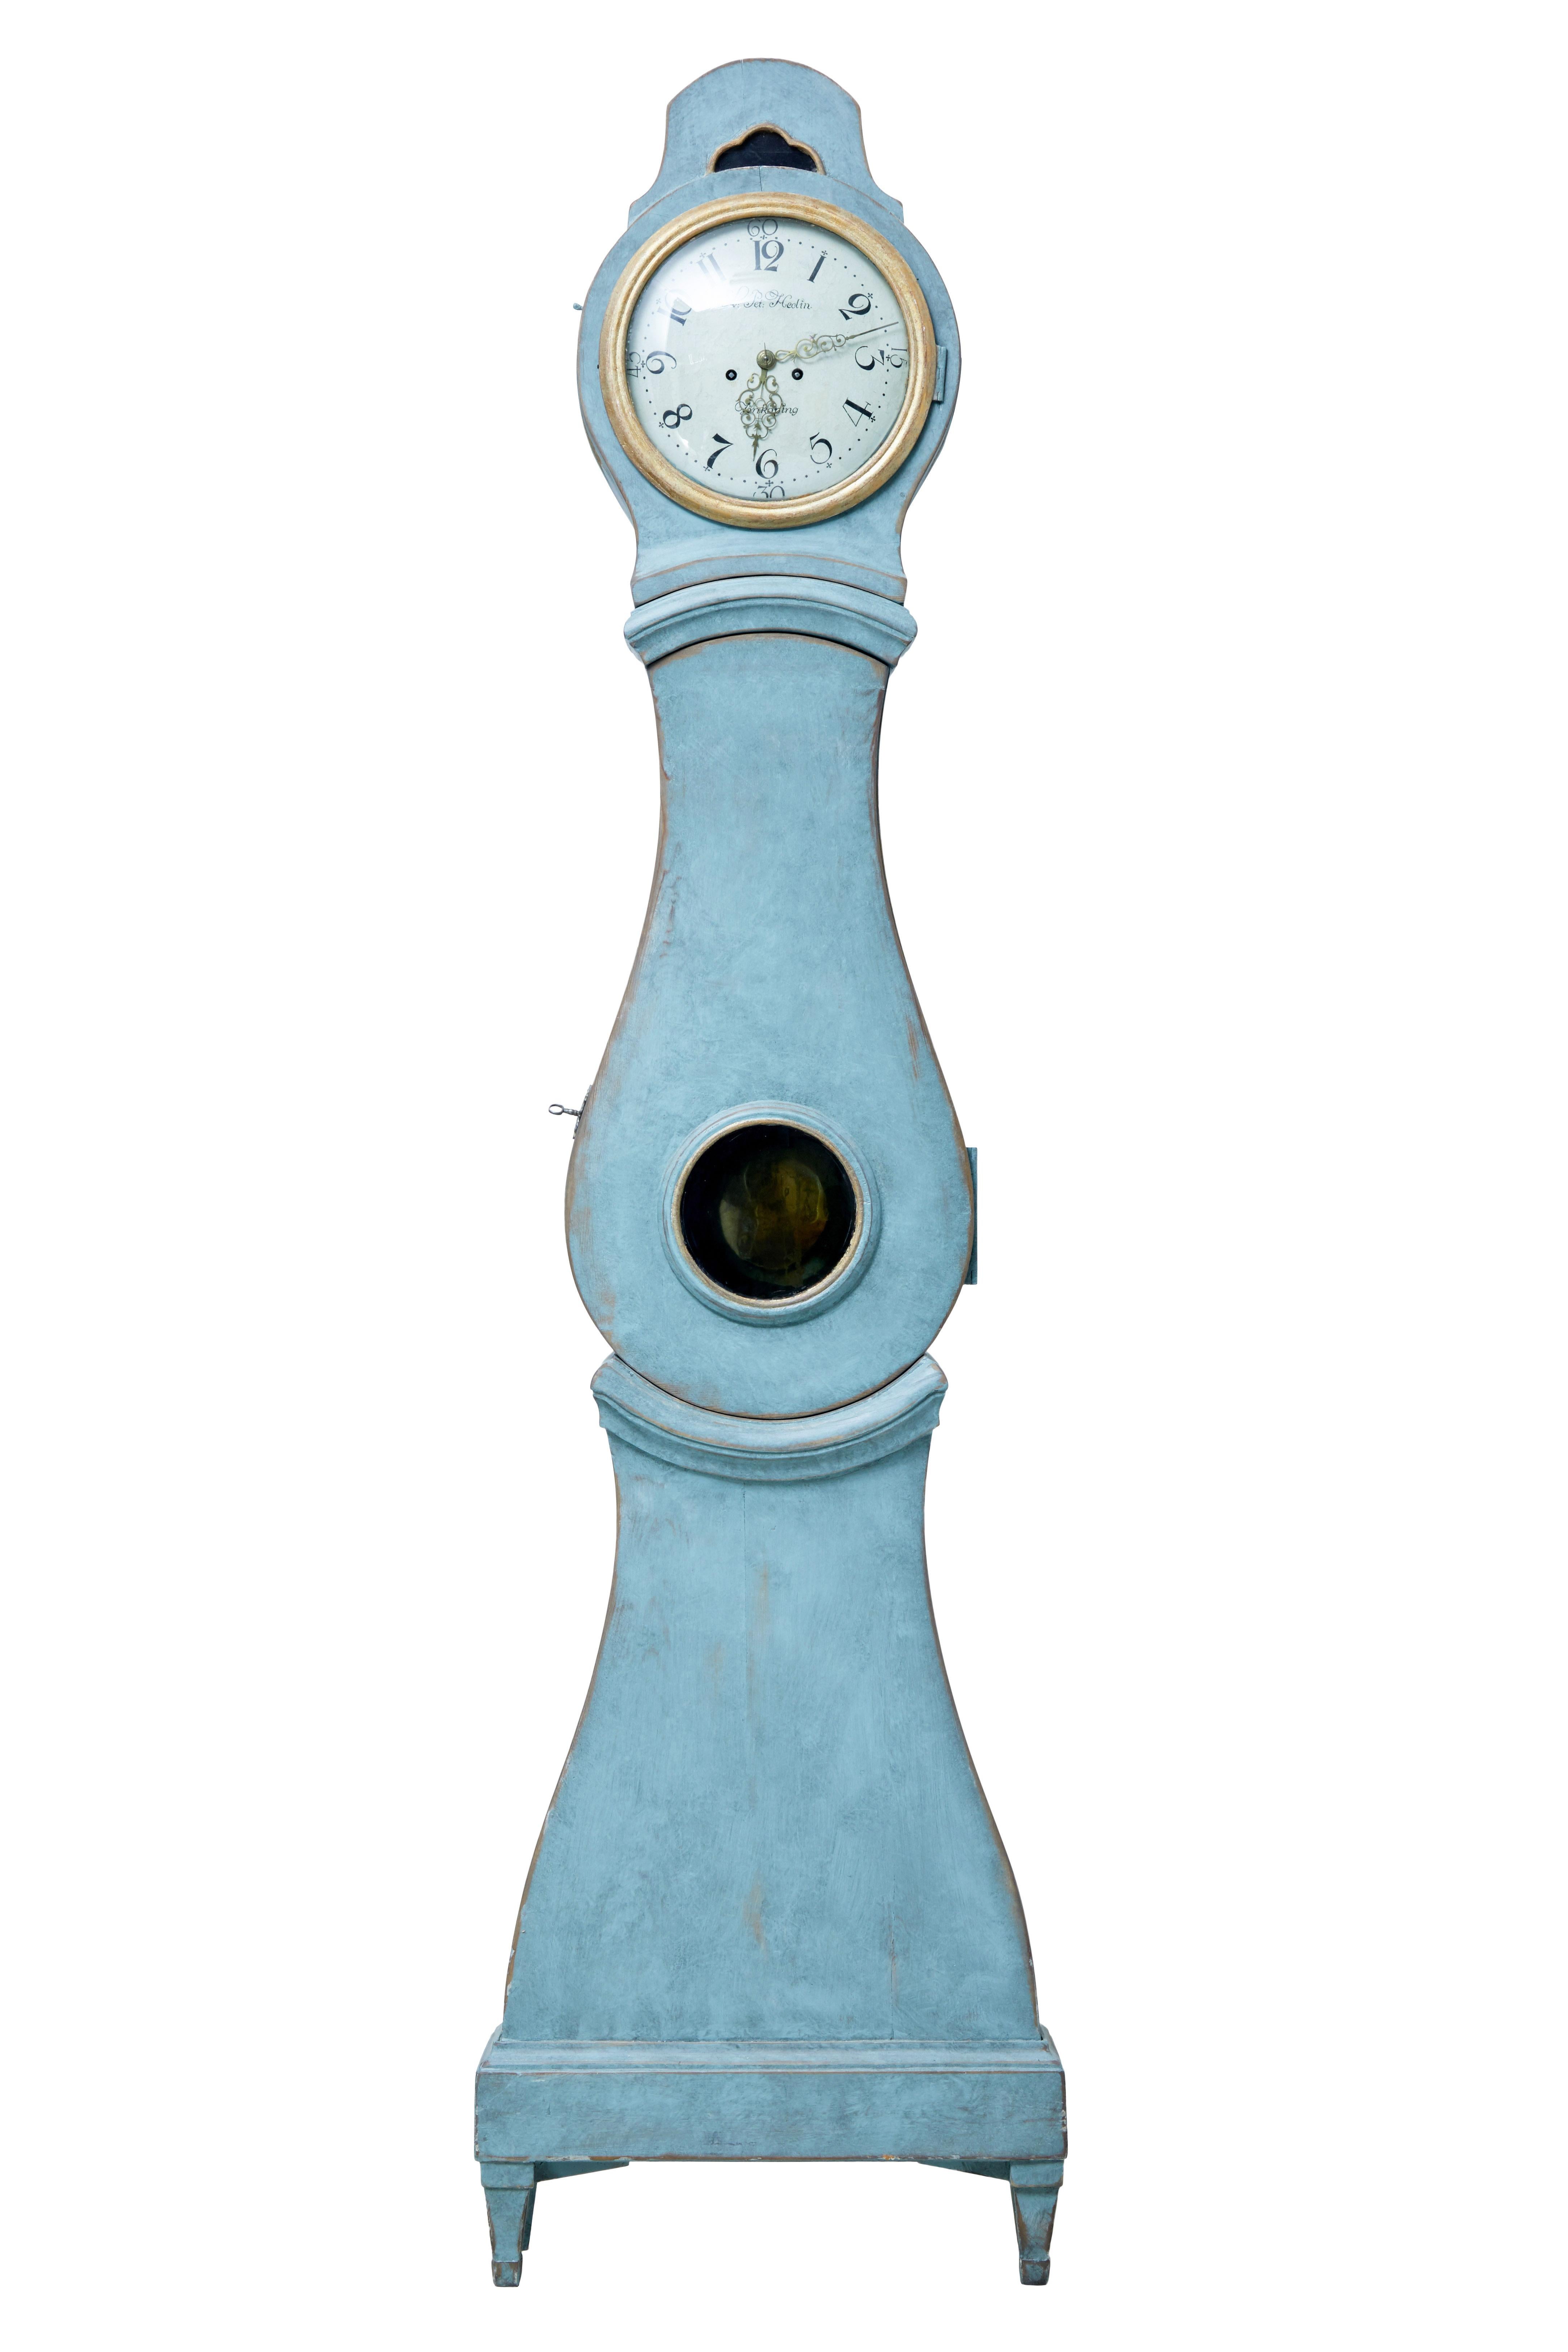 Beautiful Swedish Mora clock of large proportions, circa 1850.

Original enamel clock face with Arabic numerals, signed with makers mark and from the location of Jonkoping in Sweden.

Later painted in traditional colors with gold detailing to